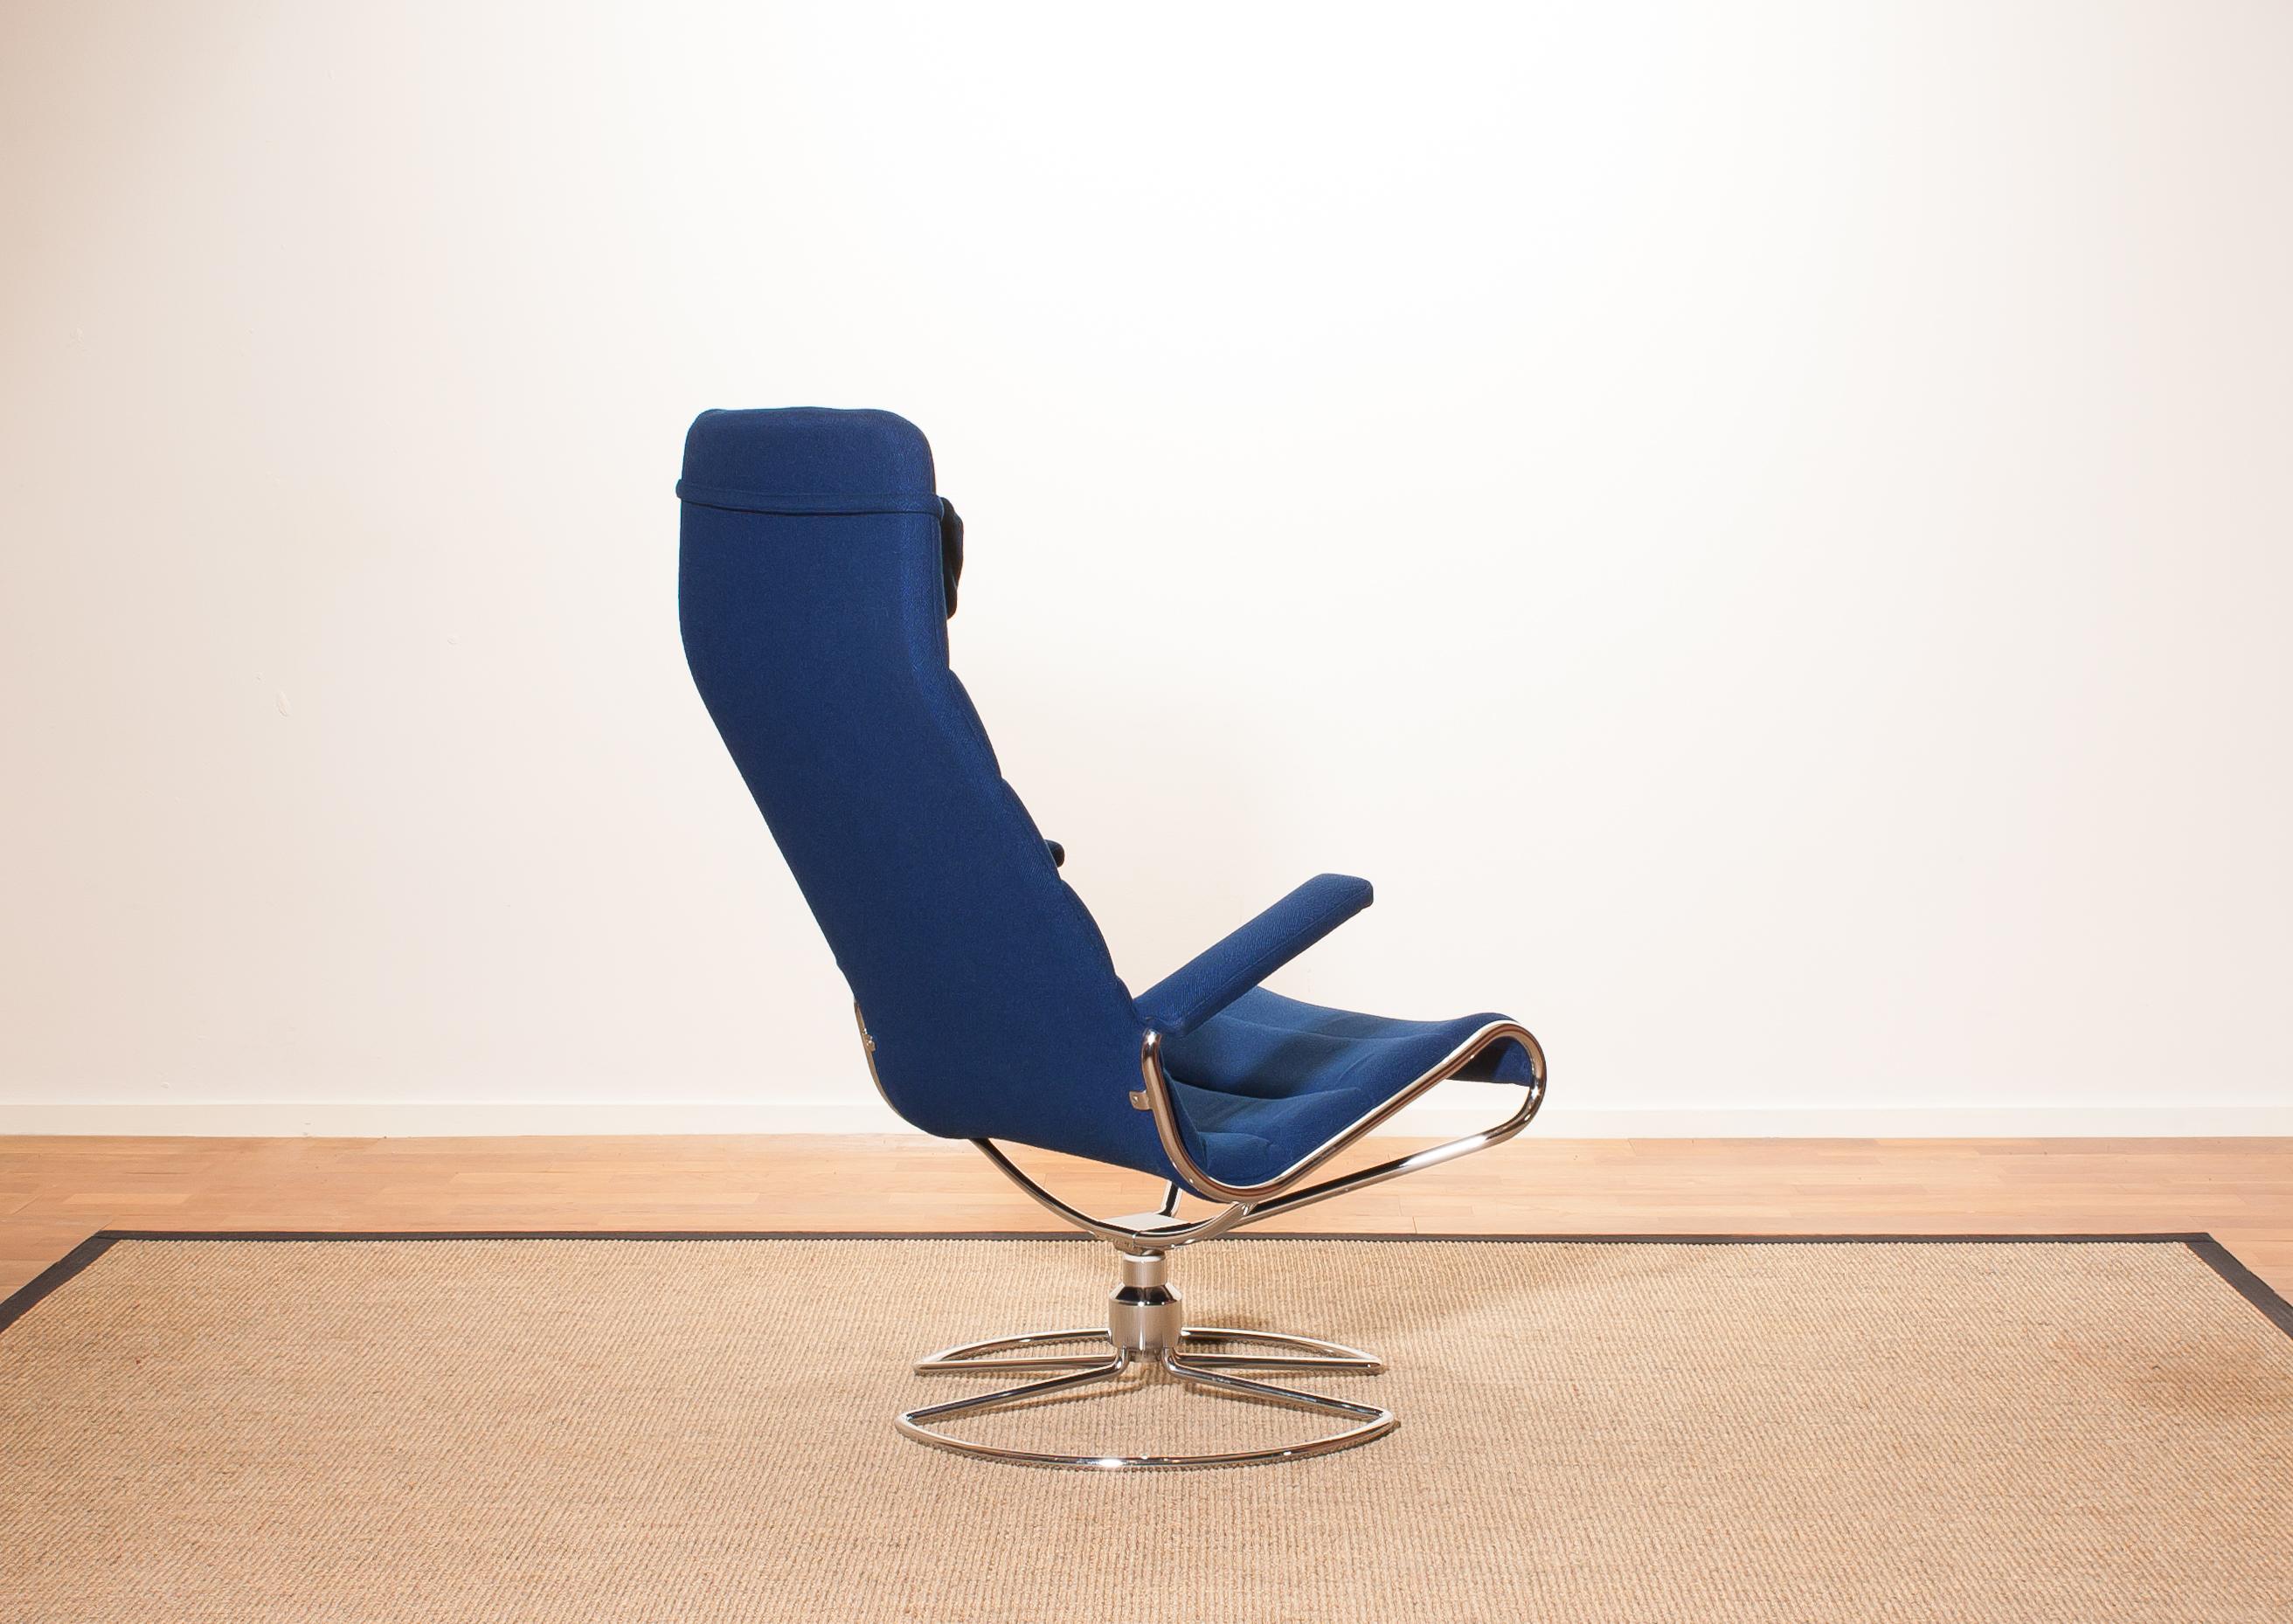 Beautiful 'Minister' chair designed by Bruno Mathsson.
It is upholstered with a royal blue wooden fabric mounted on a swivel base of tubular chromed steel.
The chair is in very good condition.
Period 1980s.
Dimensions: H 109 cm x W 60 cm x D 77